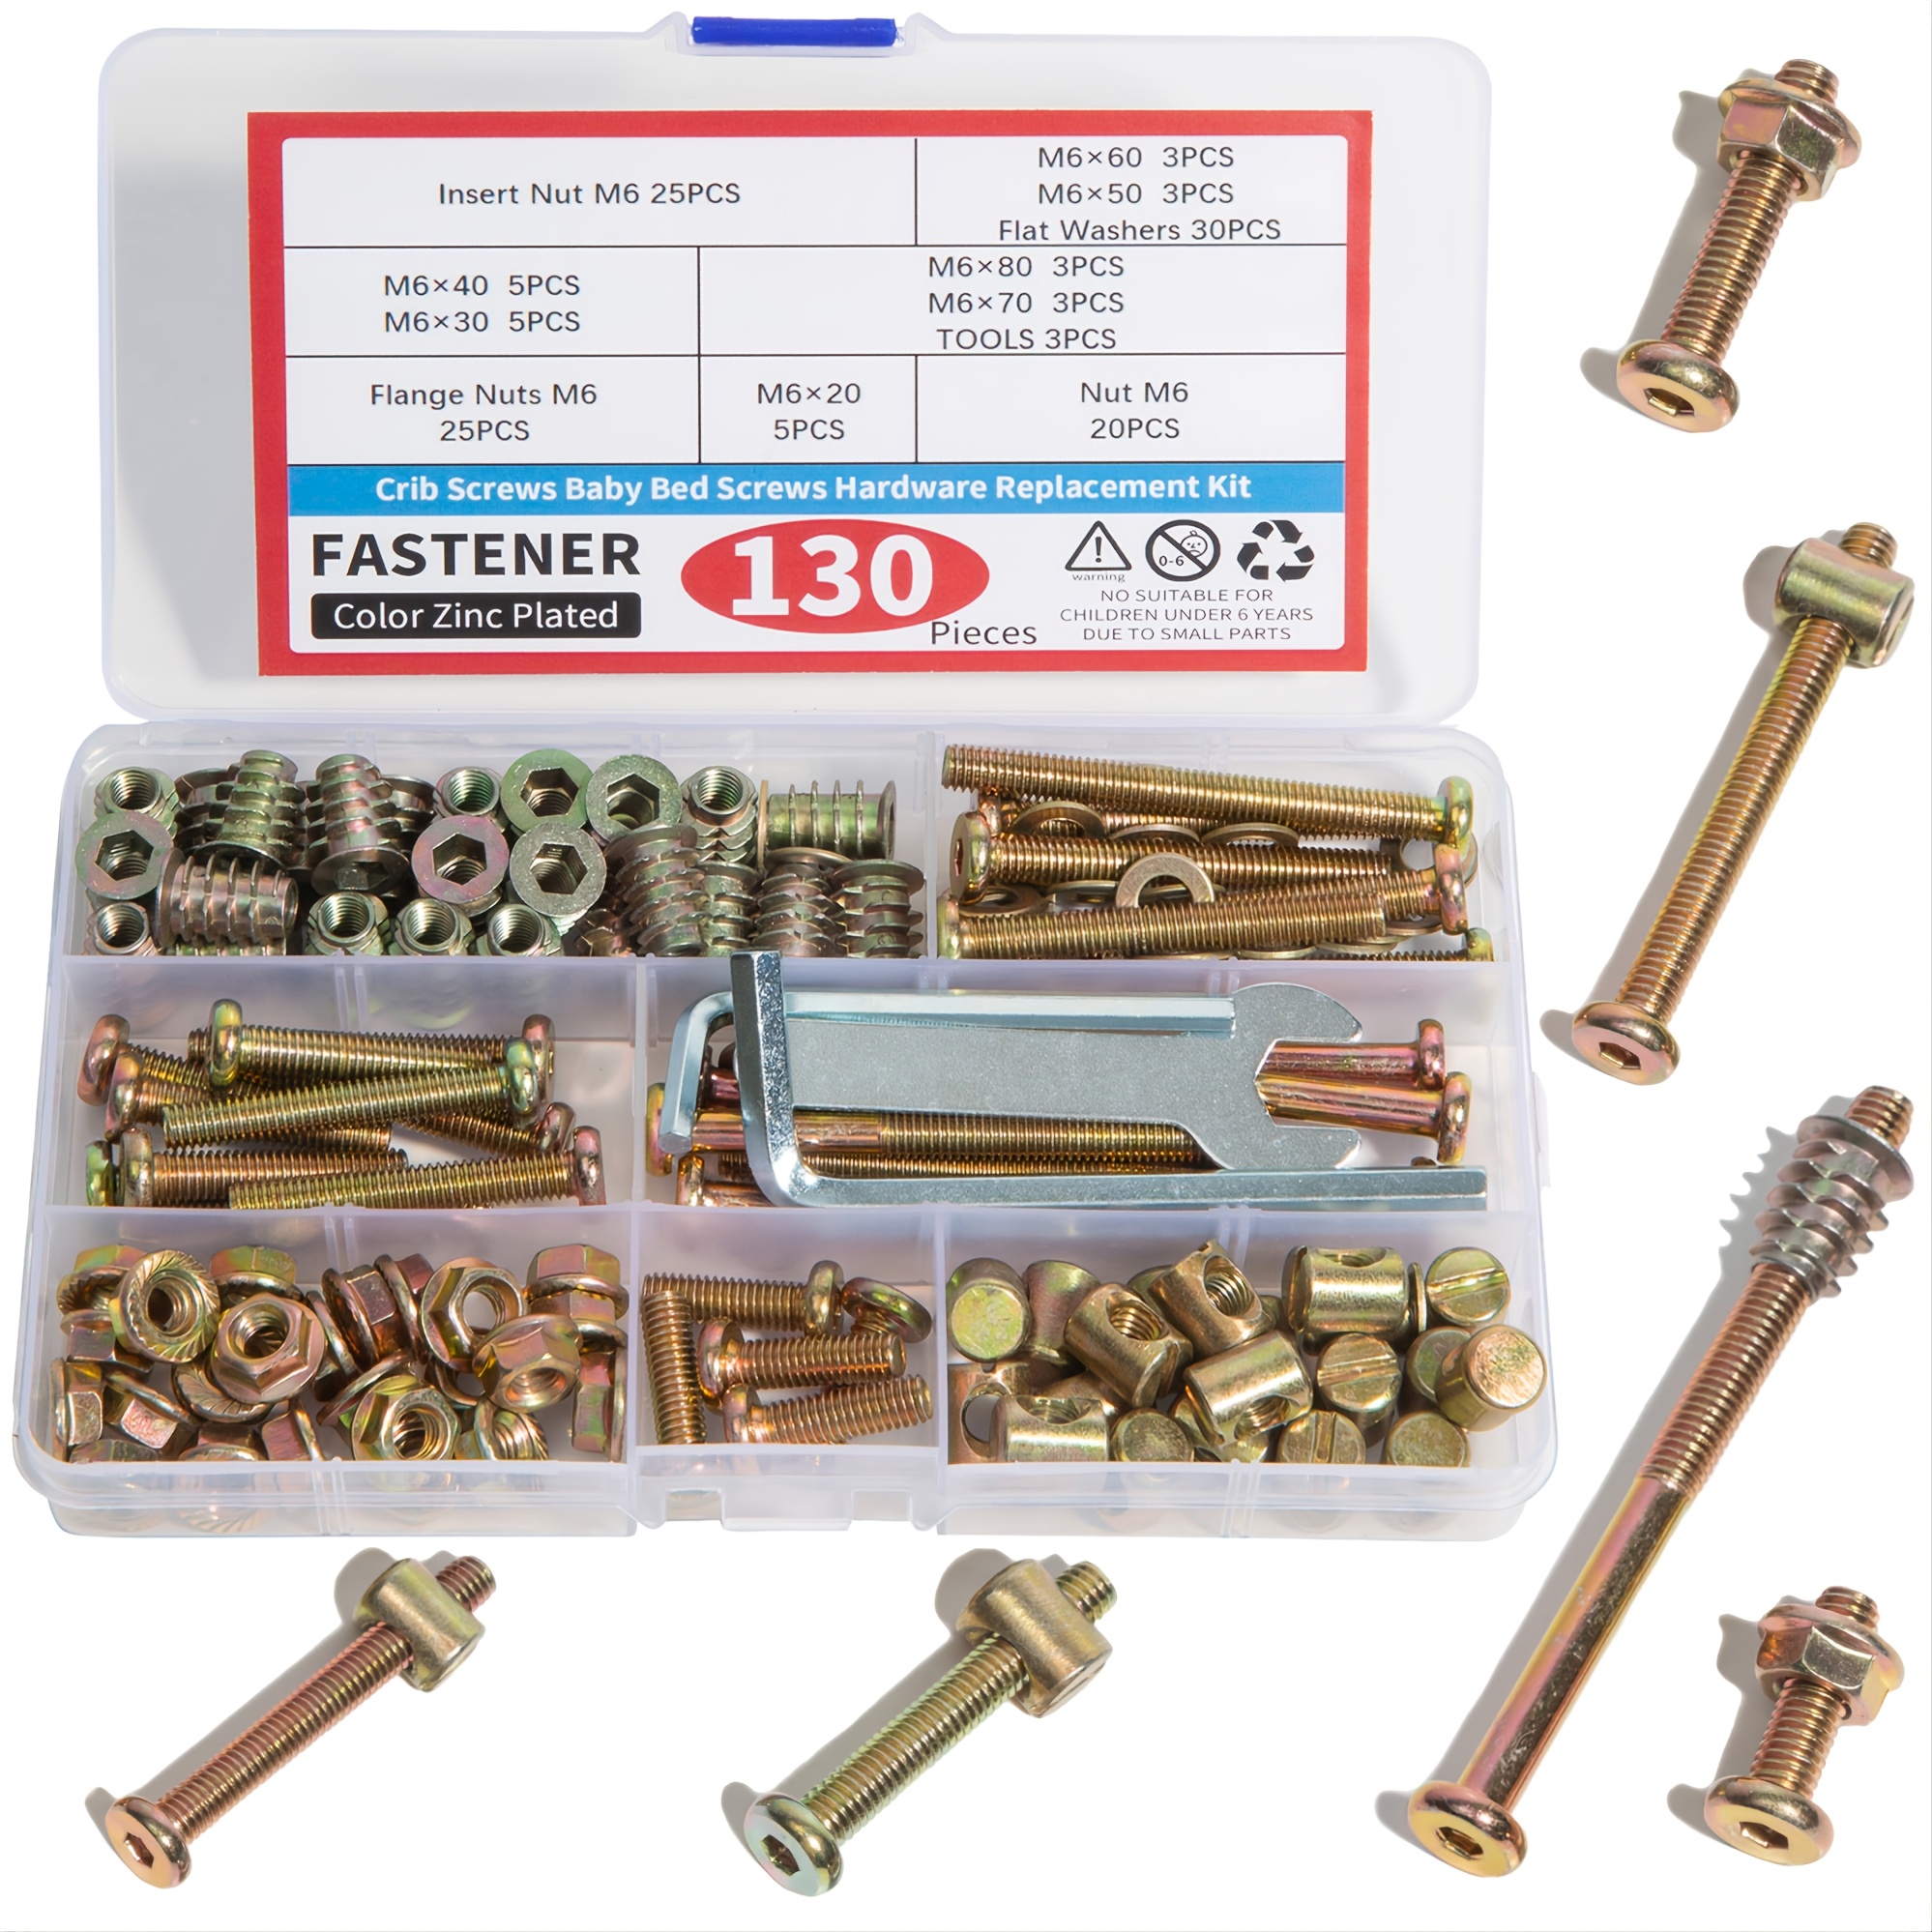 Baby Bed Crib Screws Hardware Replacement Kit 130pcs M6x20 30 40 50 60 70  80mm Hex Drive Socket Screws Barrel Nuts Assortment Kit For Beds Chairs  Furniture Crib Bolts Washers Replacement Set